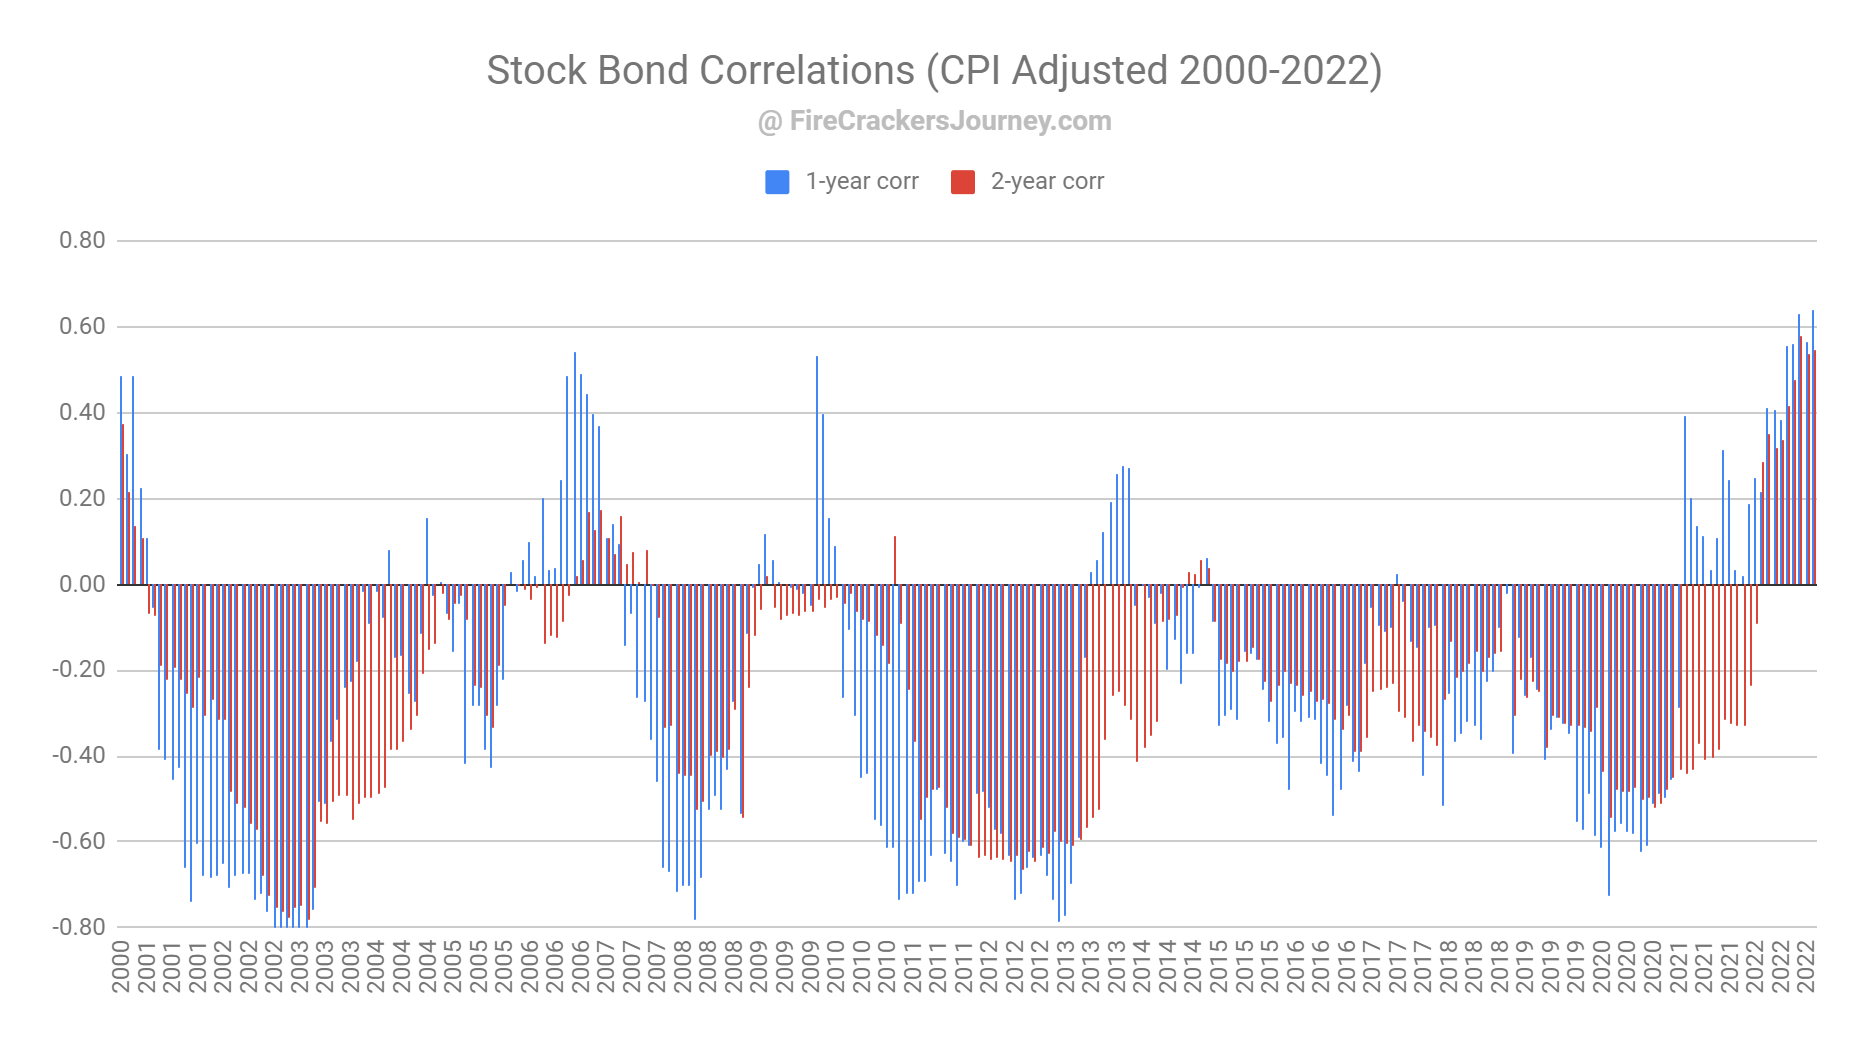 Bonds have a positive correlation with stocks now